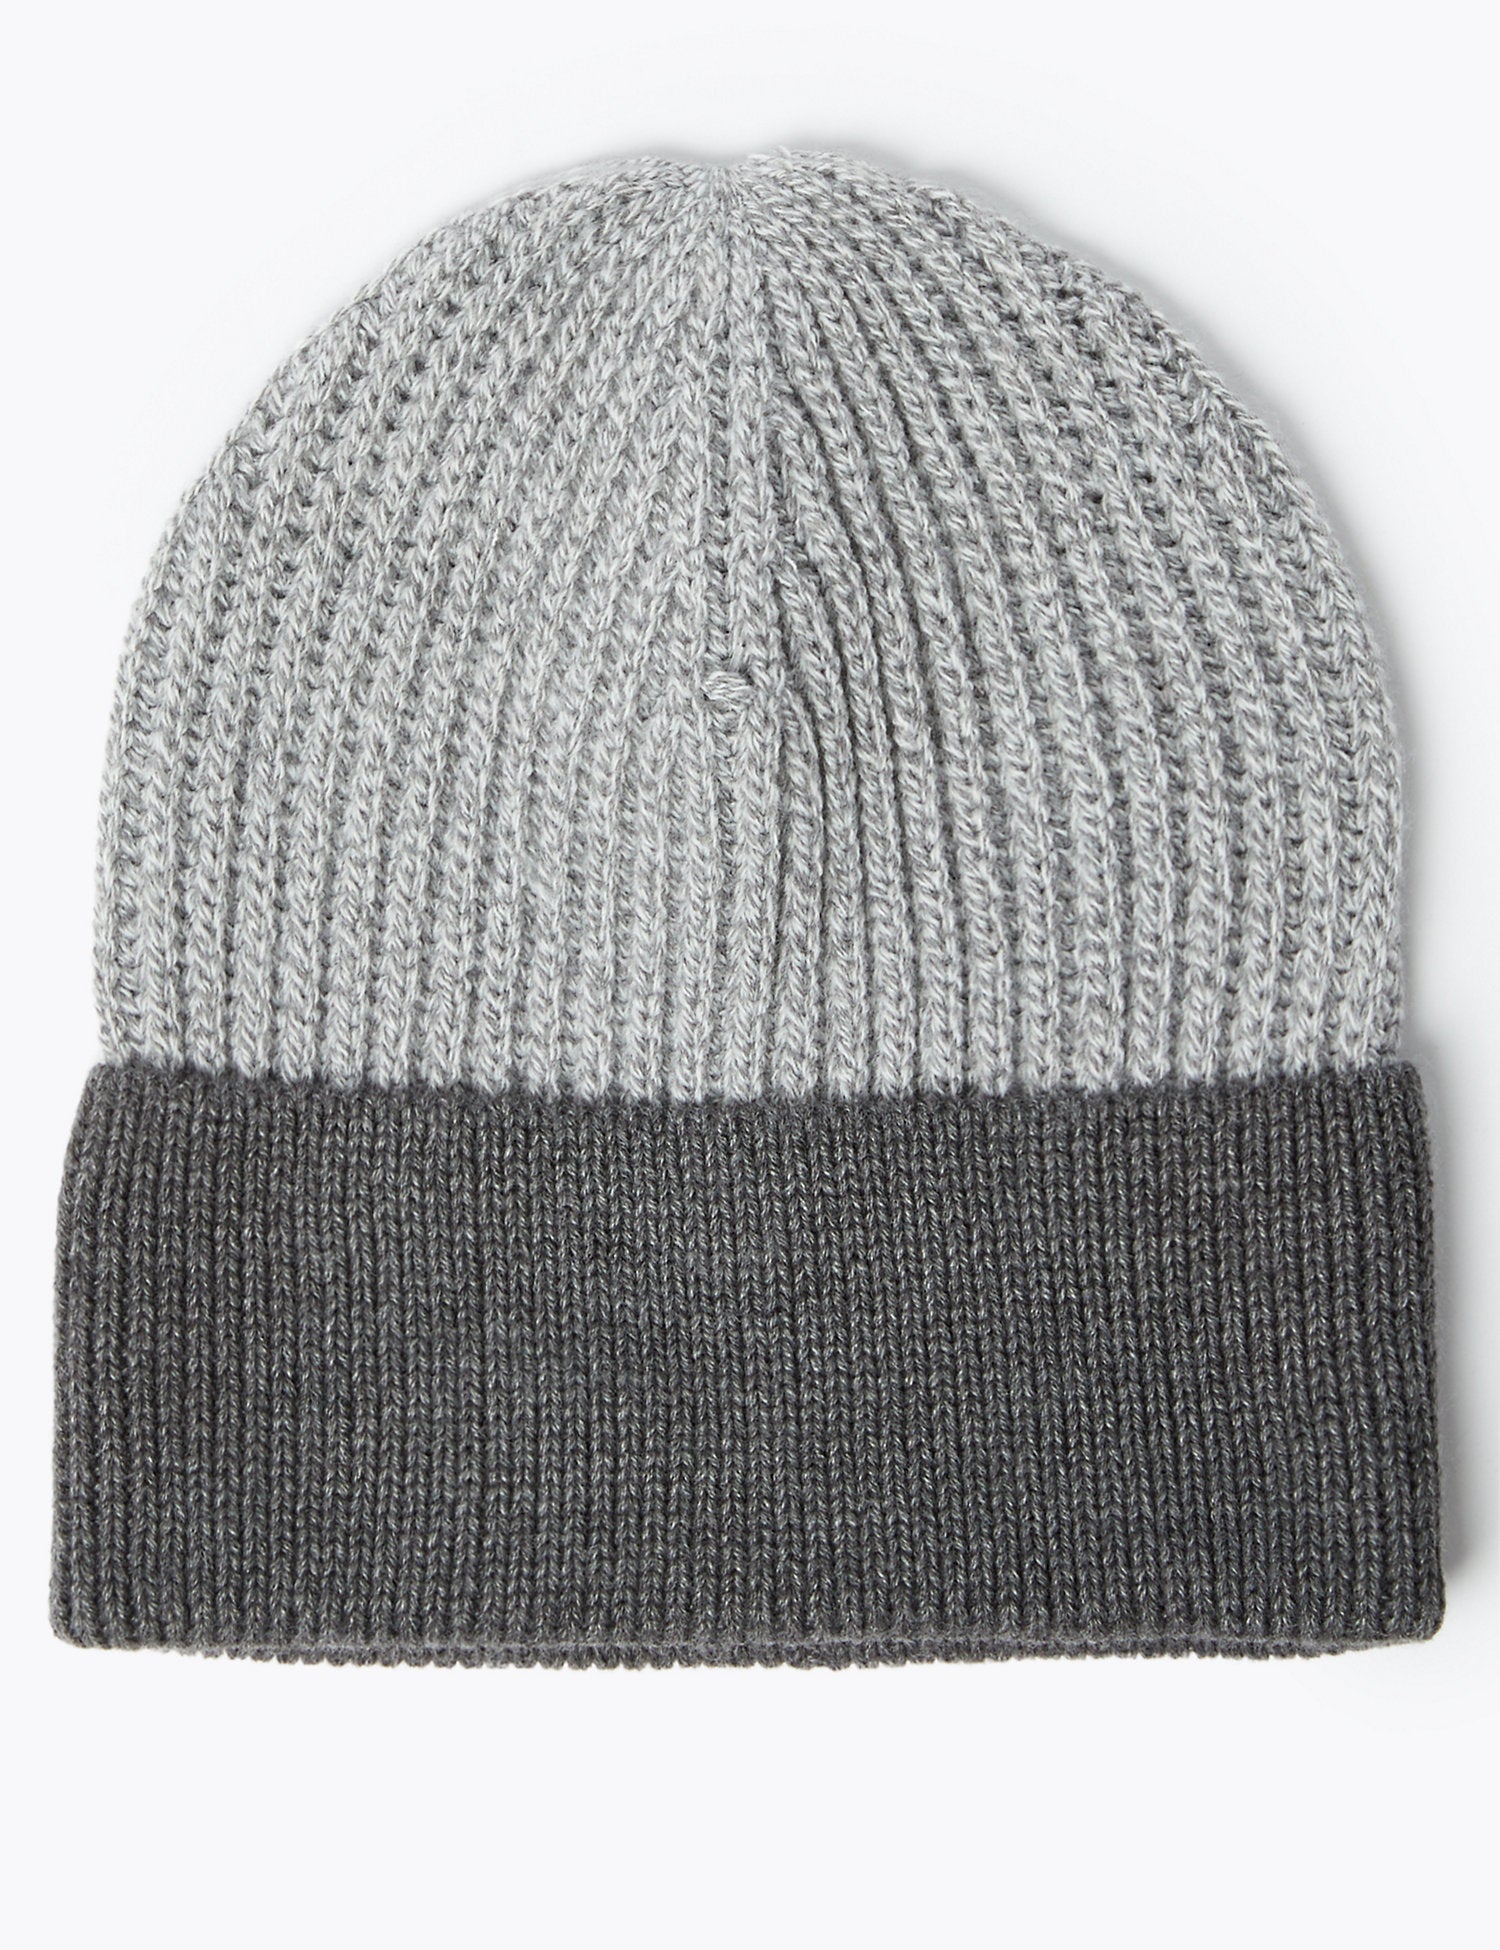 Knitted Beanie Hat with Thermowarmth